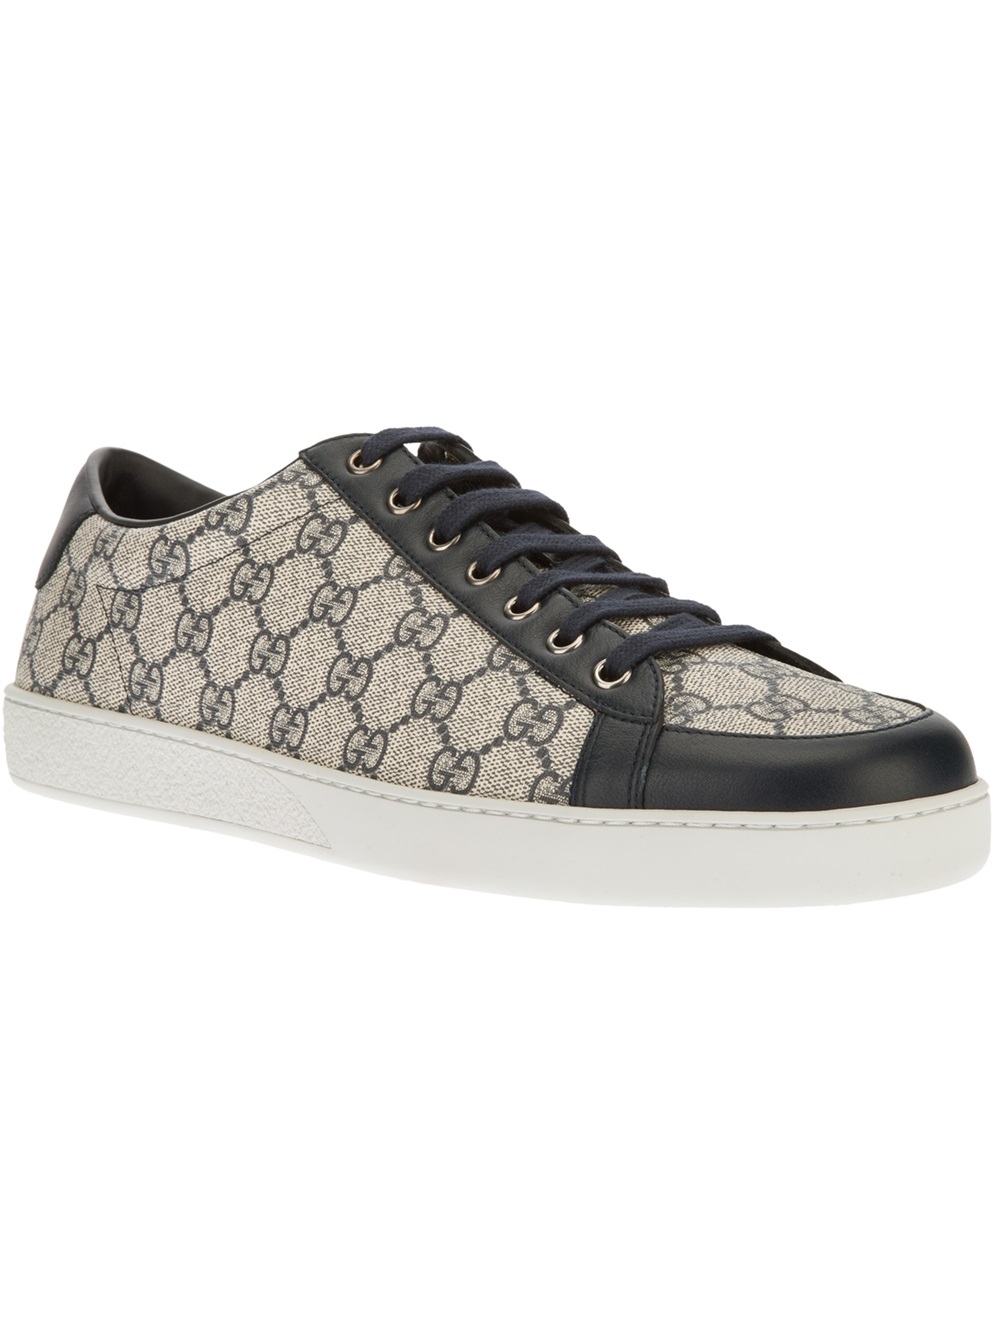 Gucci Trainers Mens Black Germany, SAVE 30% - mpgc.net